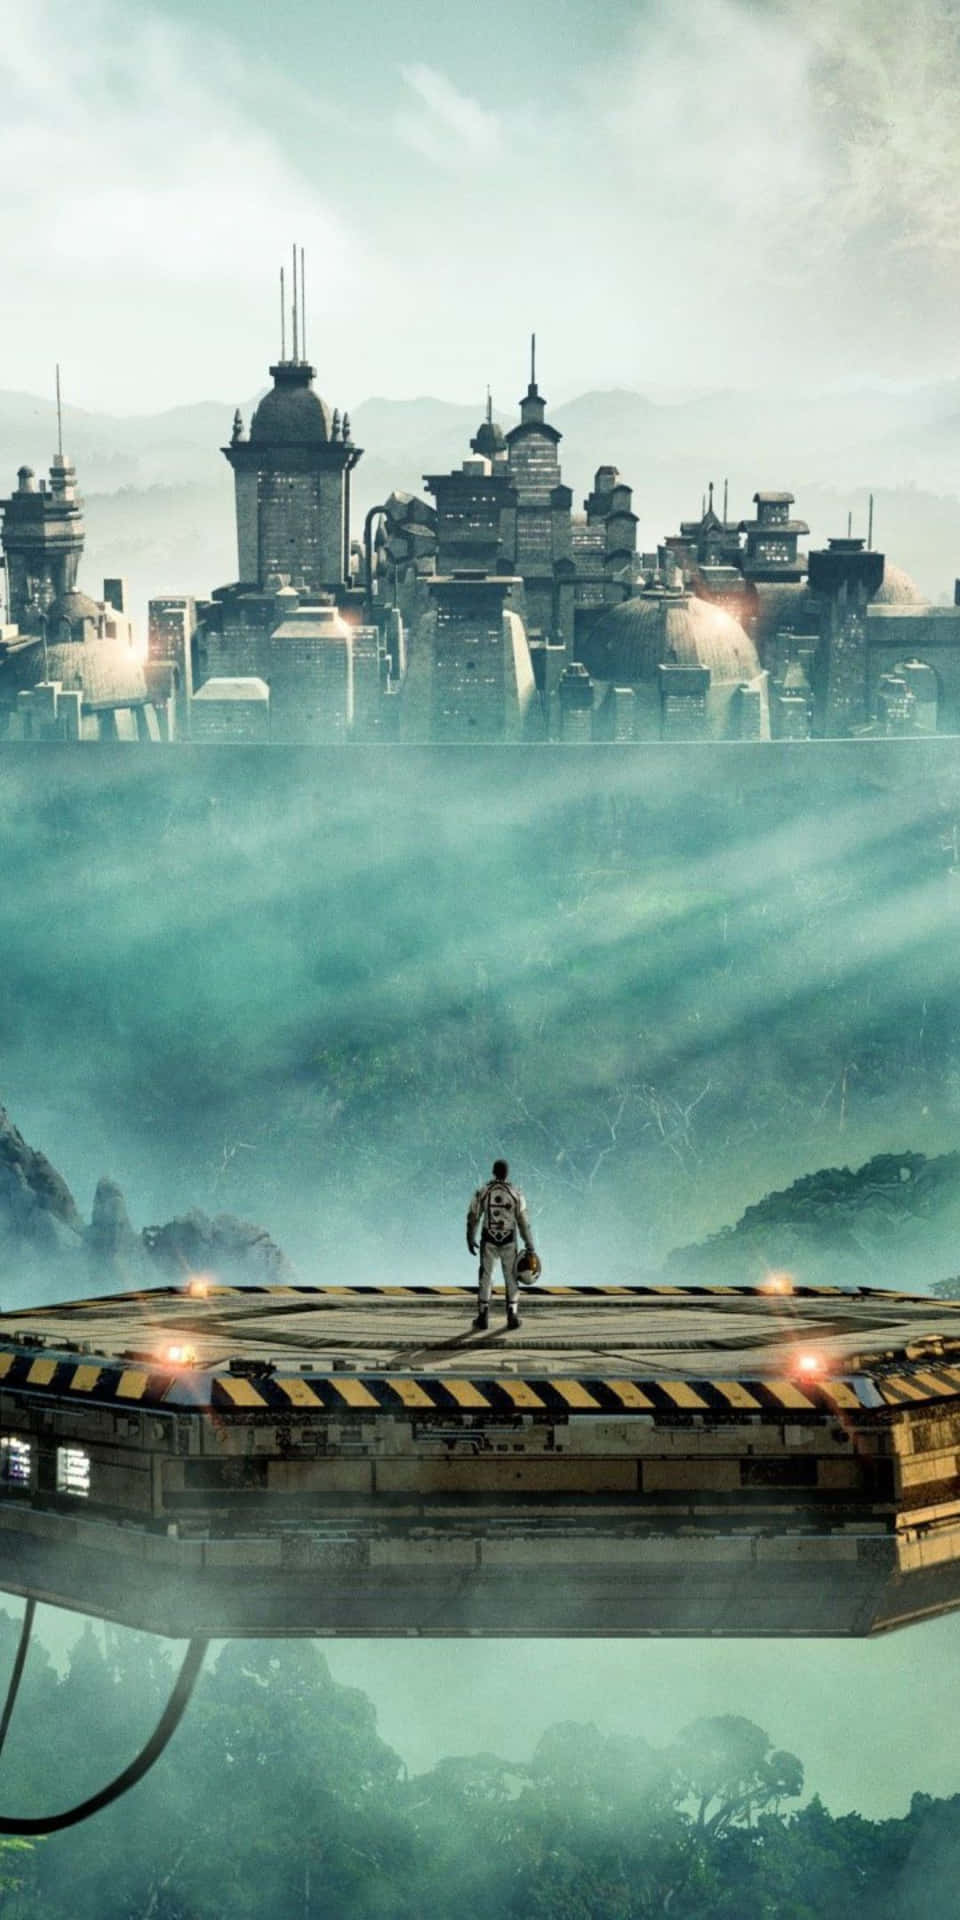 Discover a new civilization with Pixel 3 - Civilization: Beyond Earth